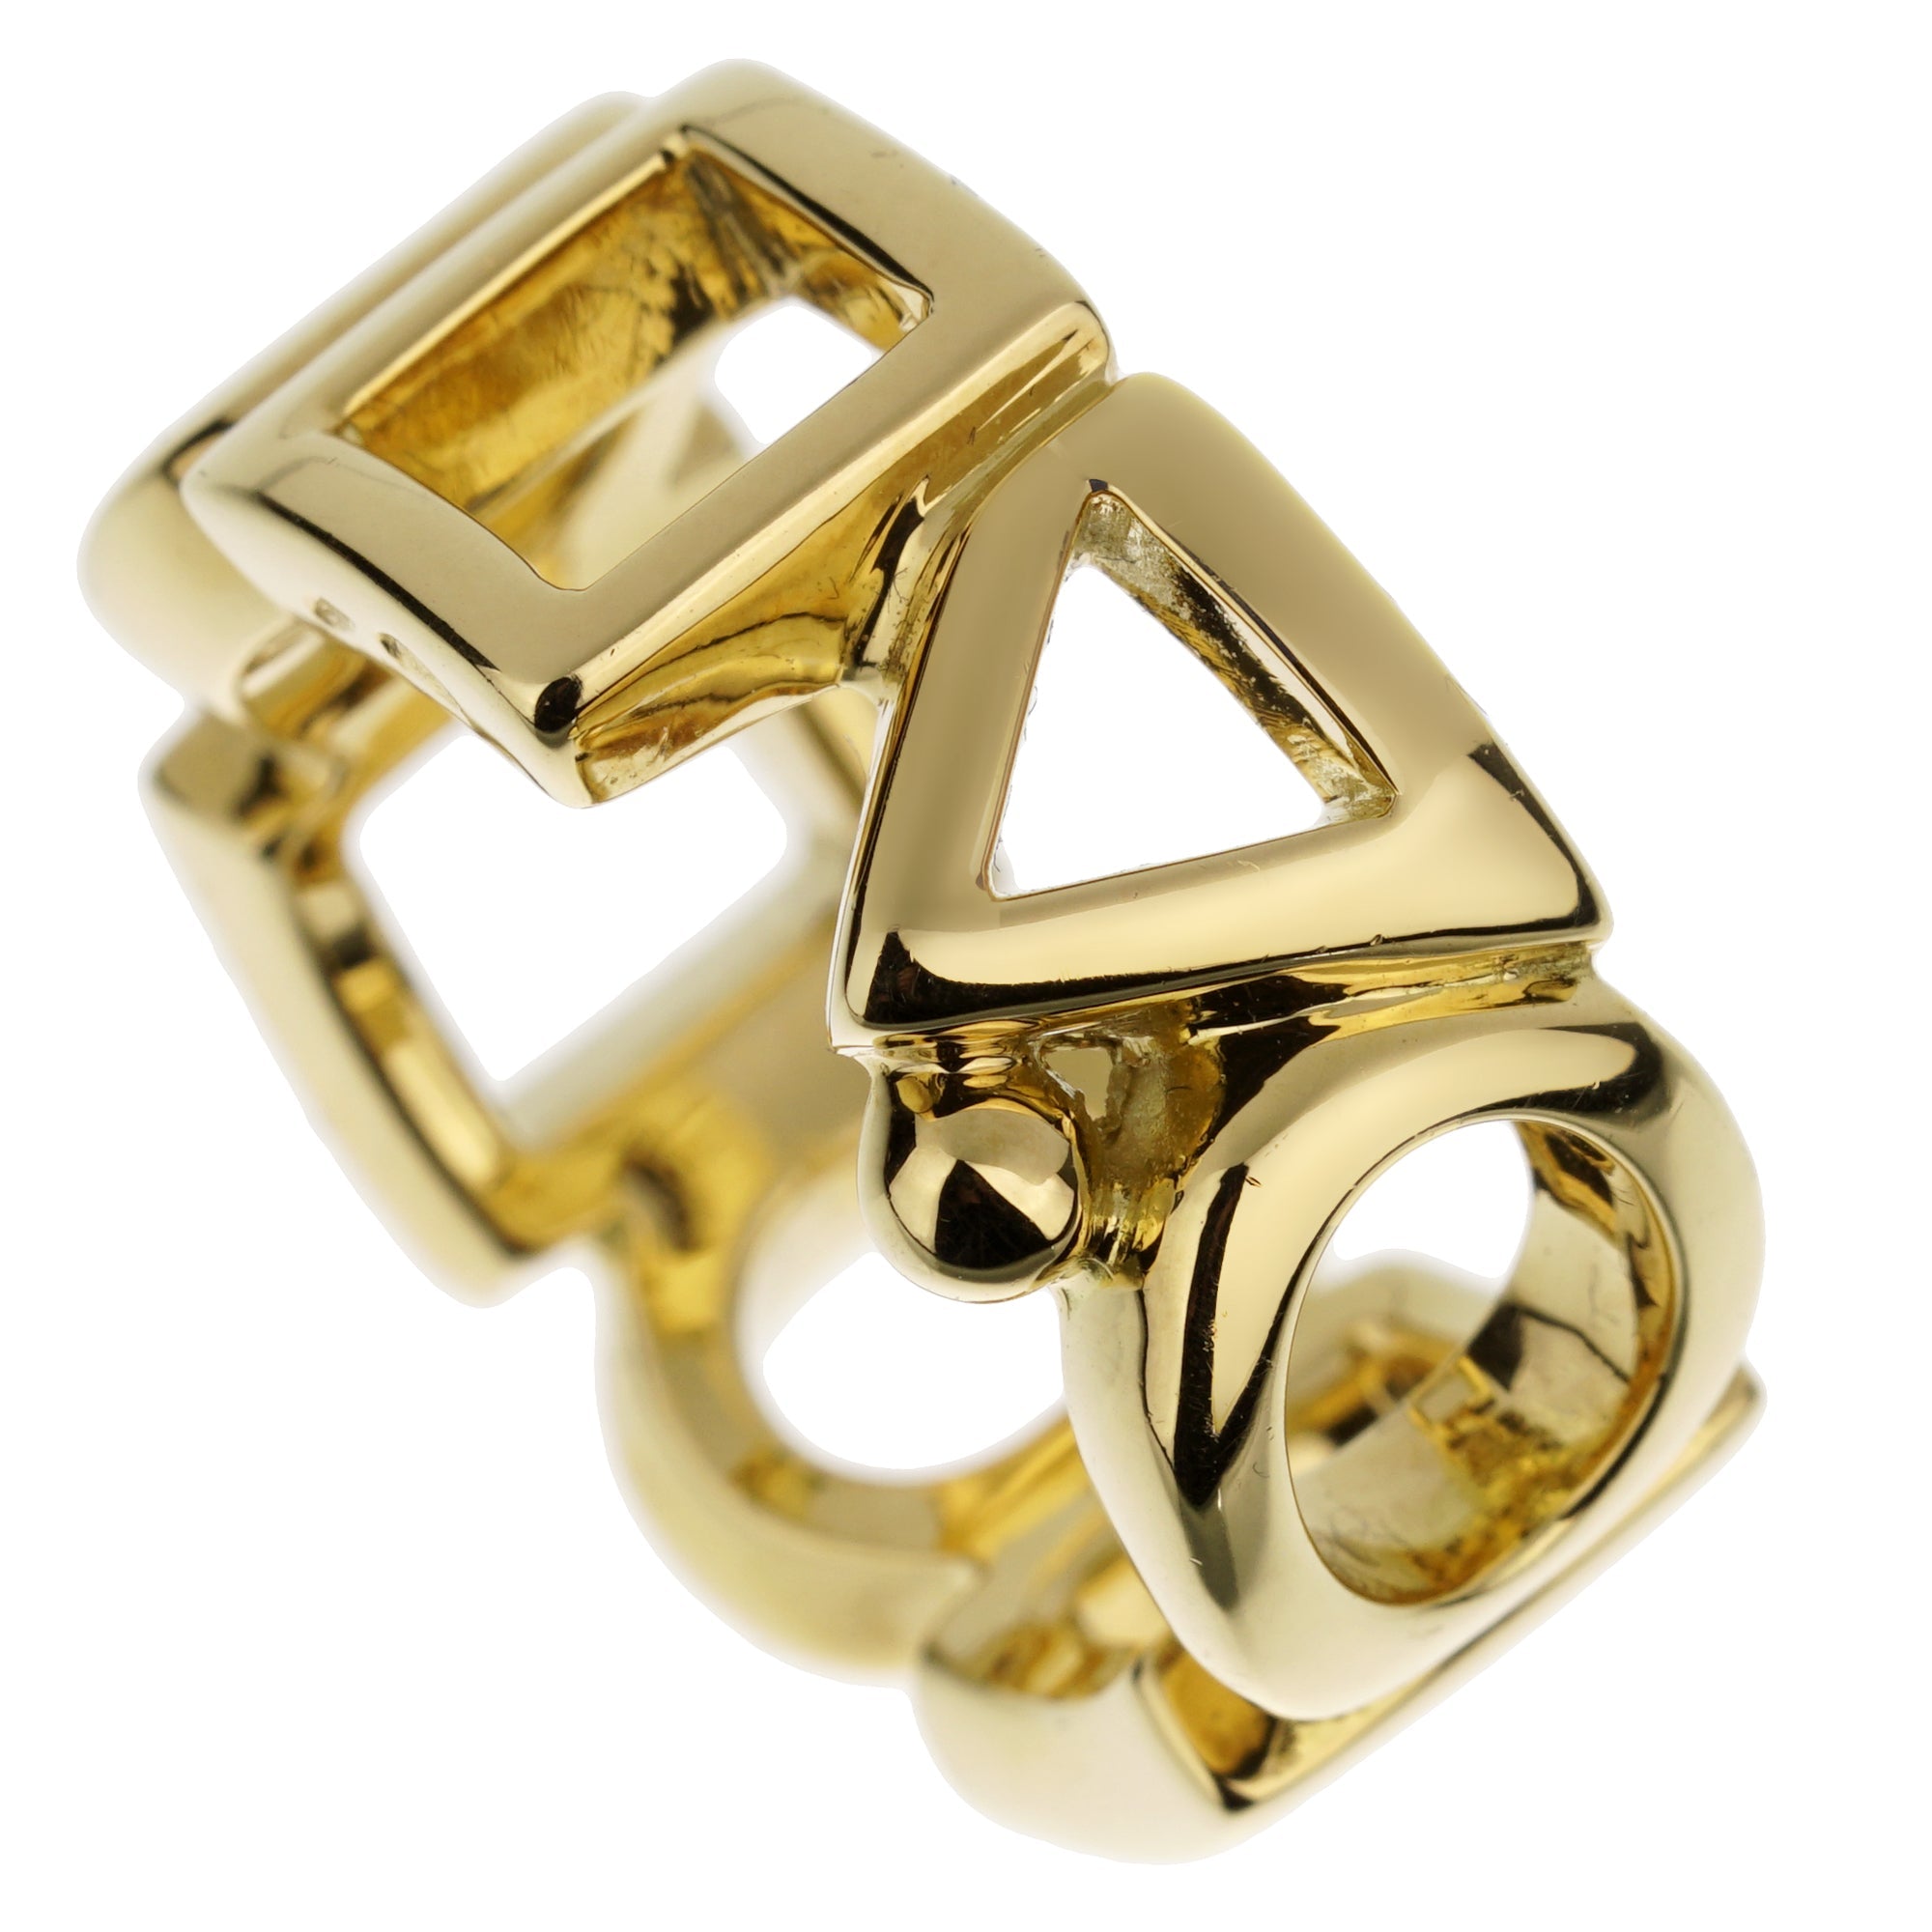 Chanel Strass & Enamel CC Cocktail Ring - Gold-Plated Cocktail Ring, Rings  - CHA970534